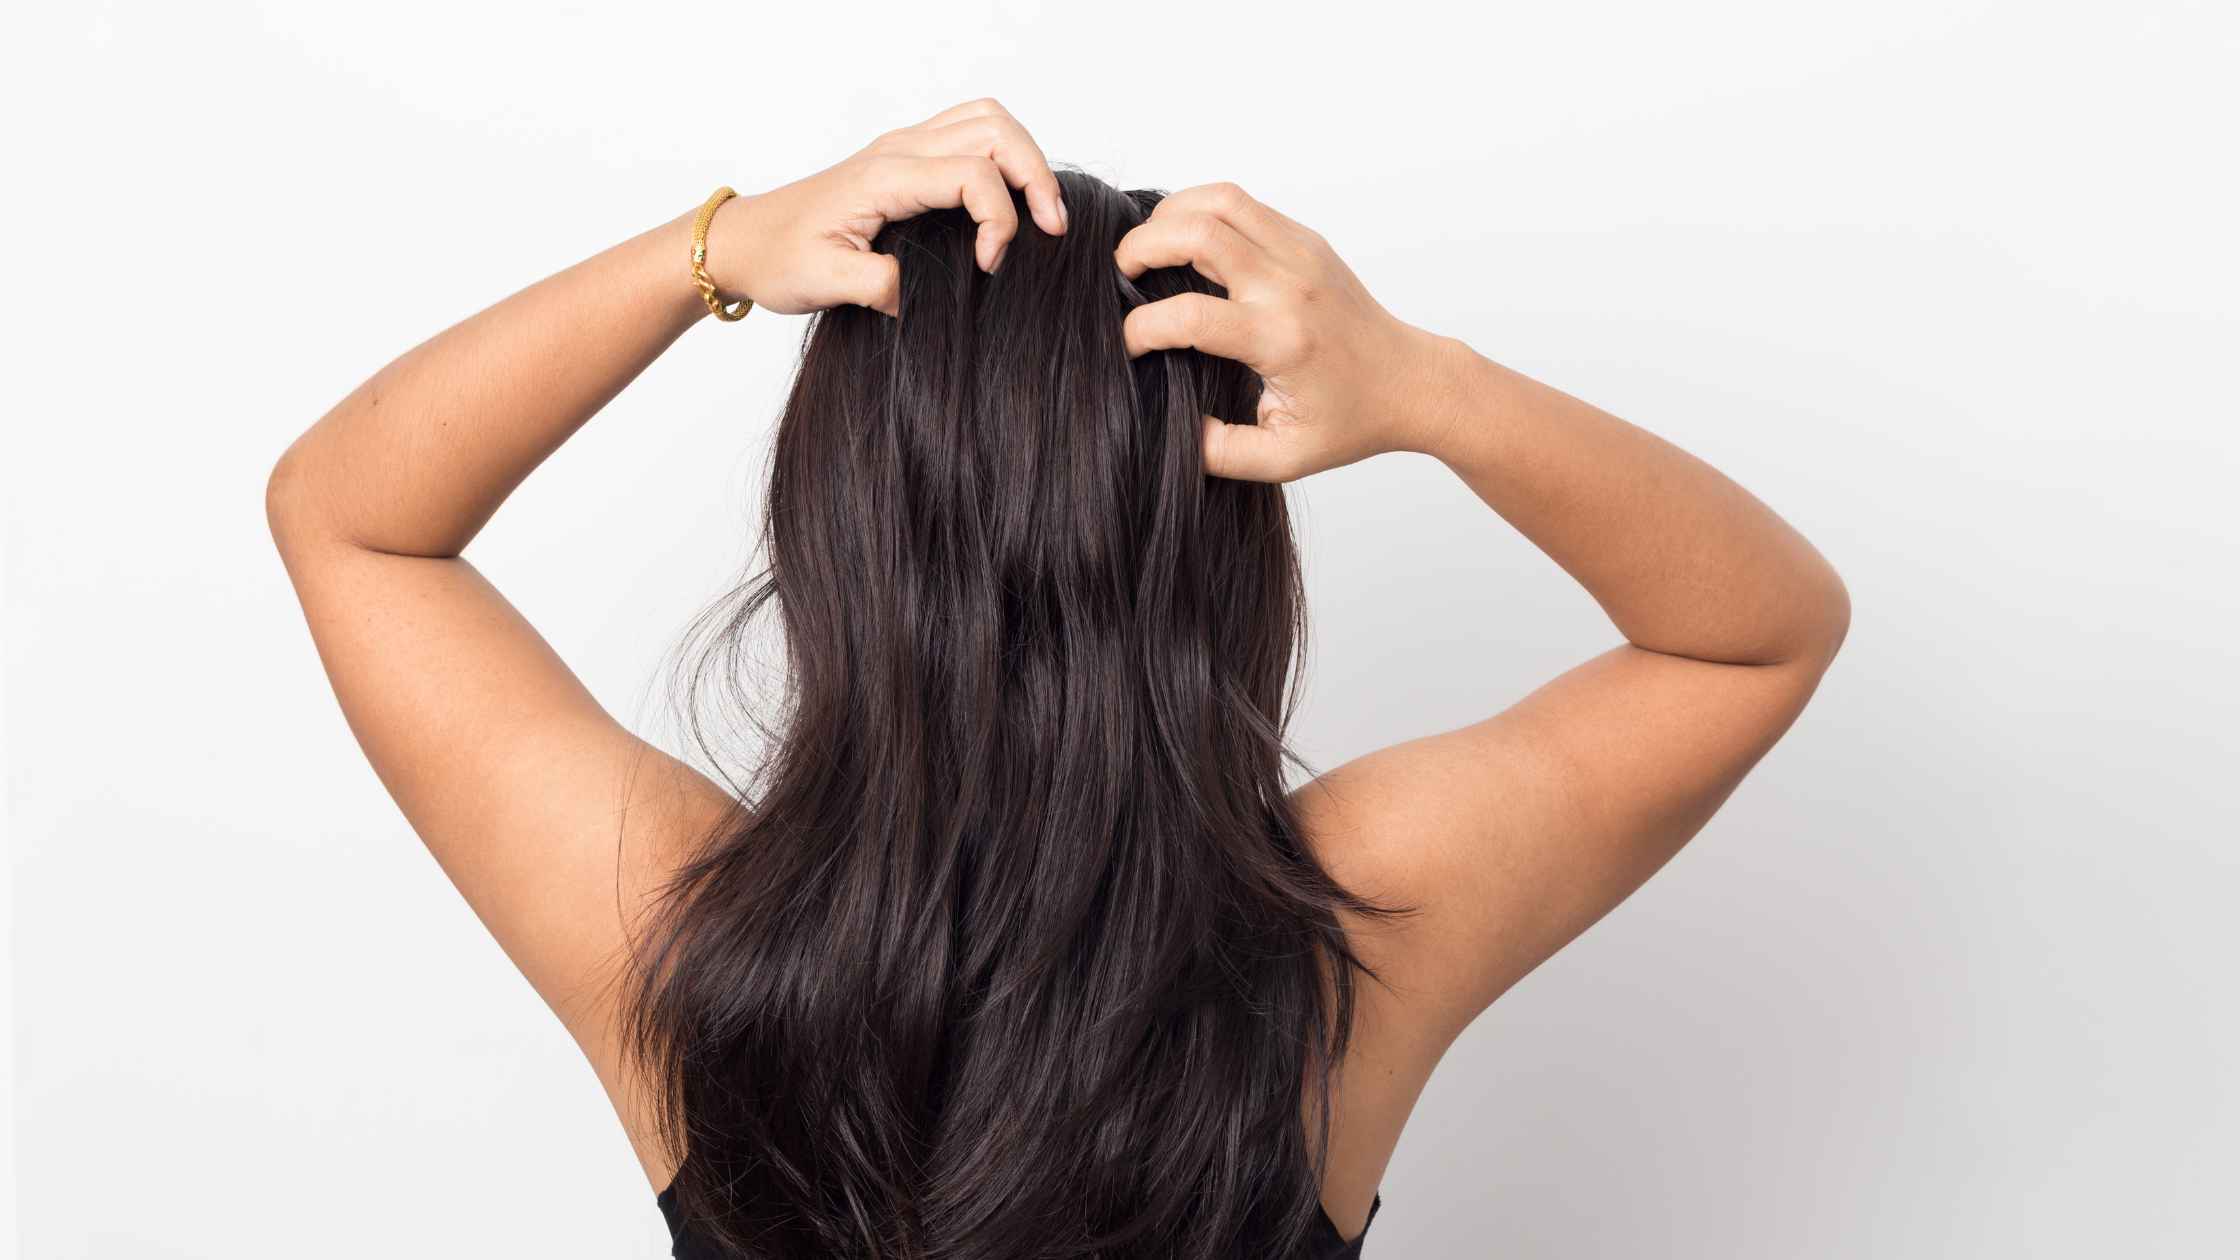 Natural Oils for Hair Care: Which Ones and Why?